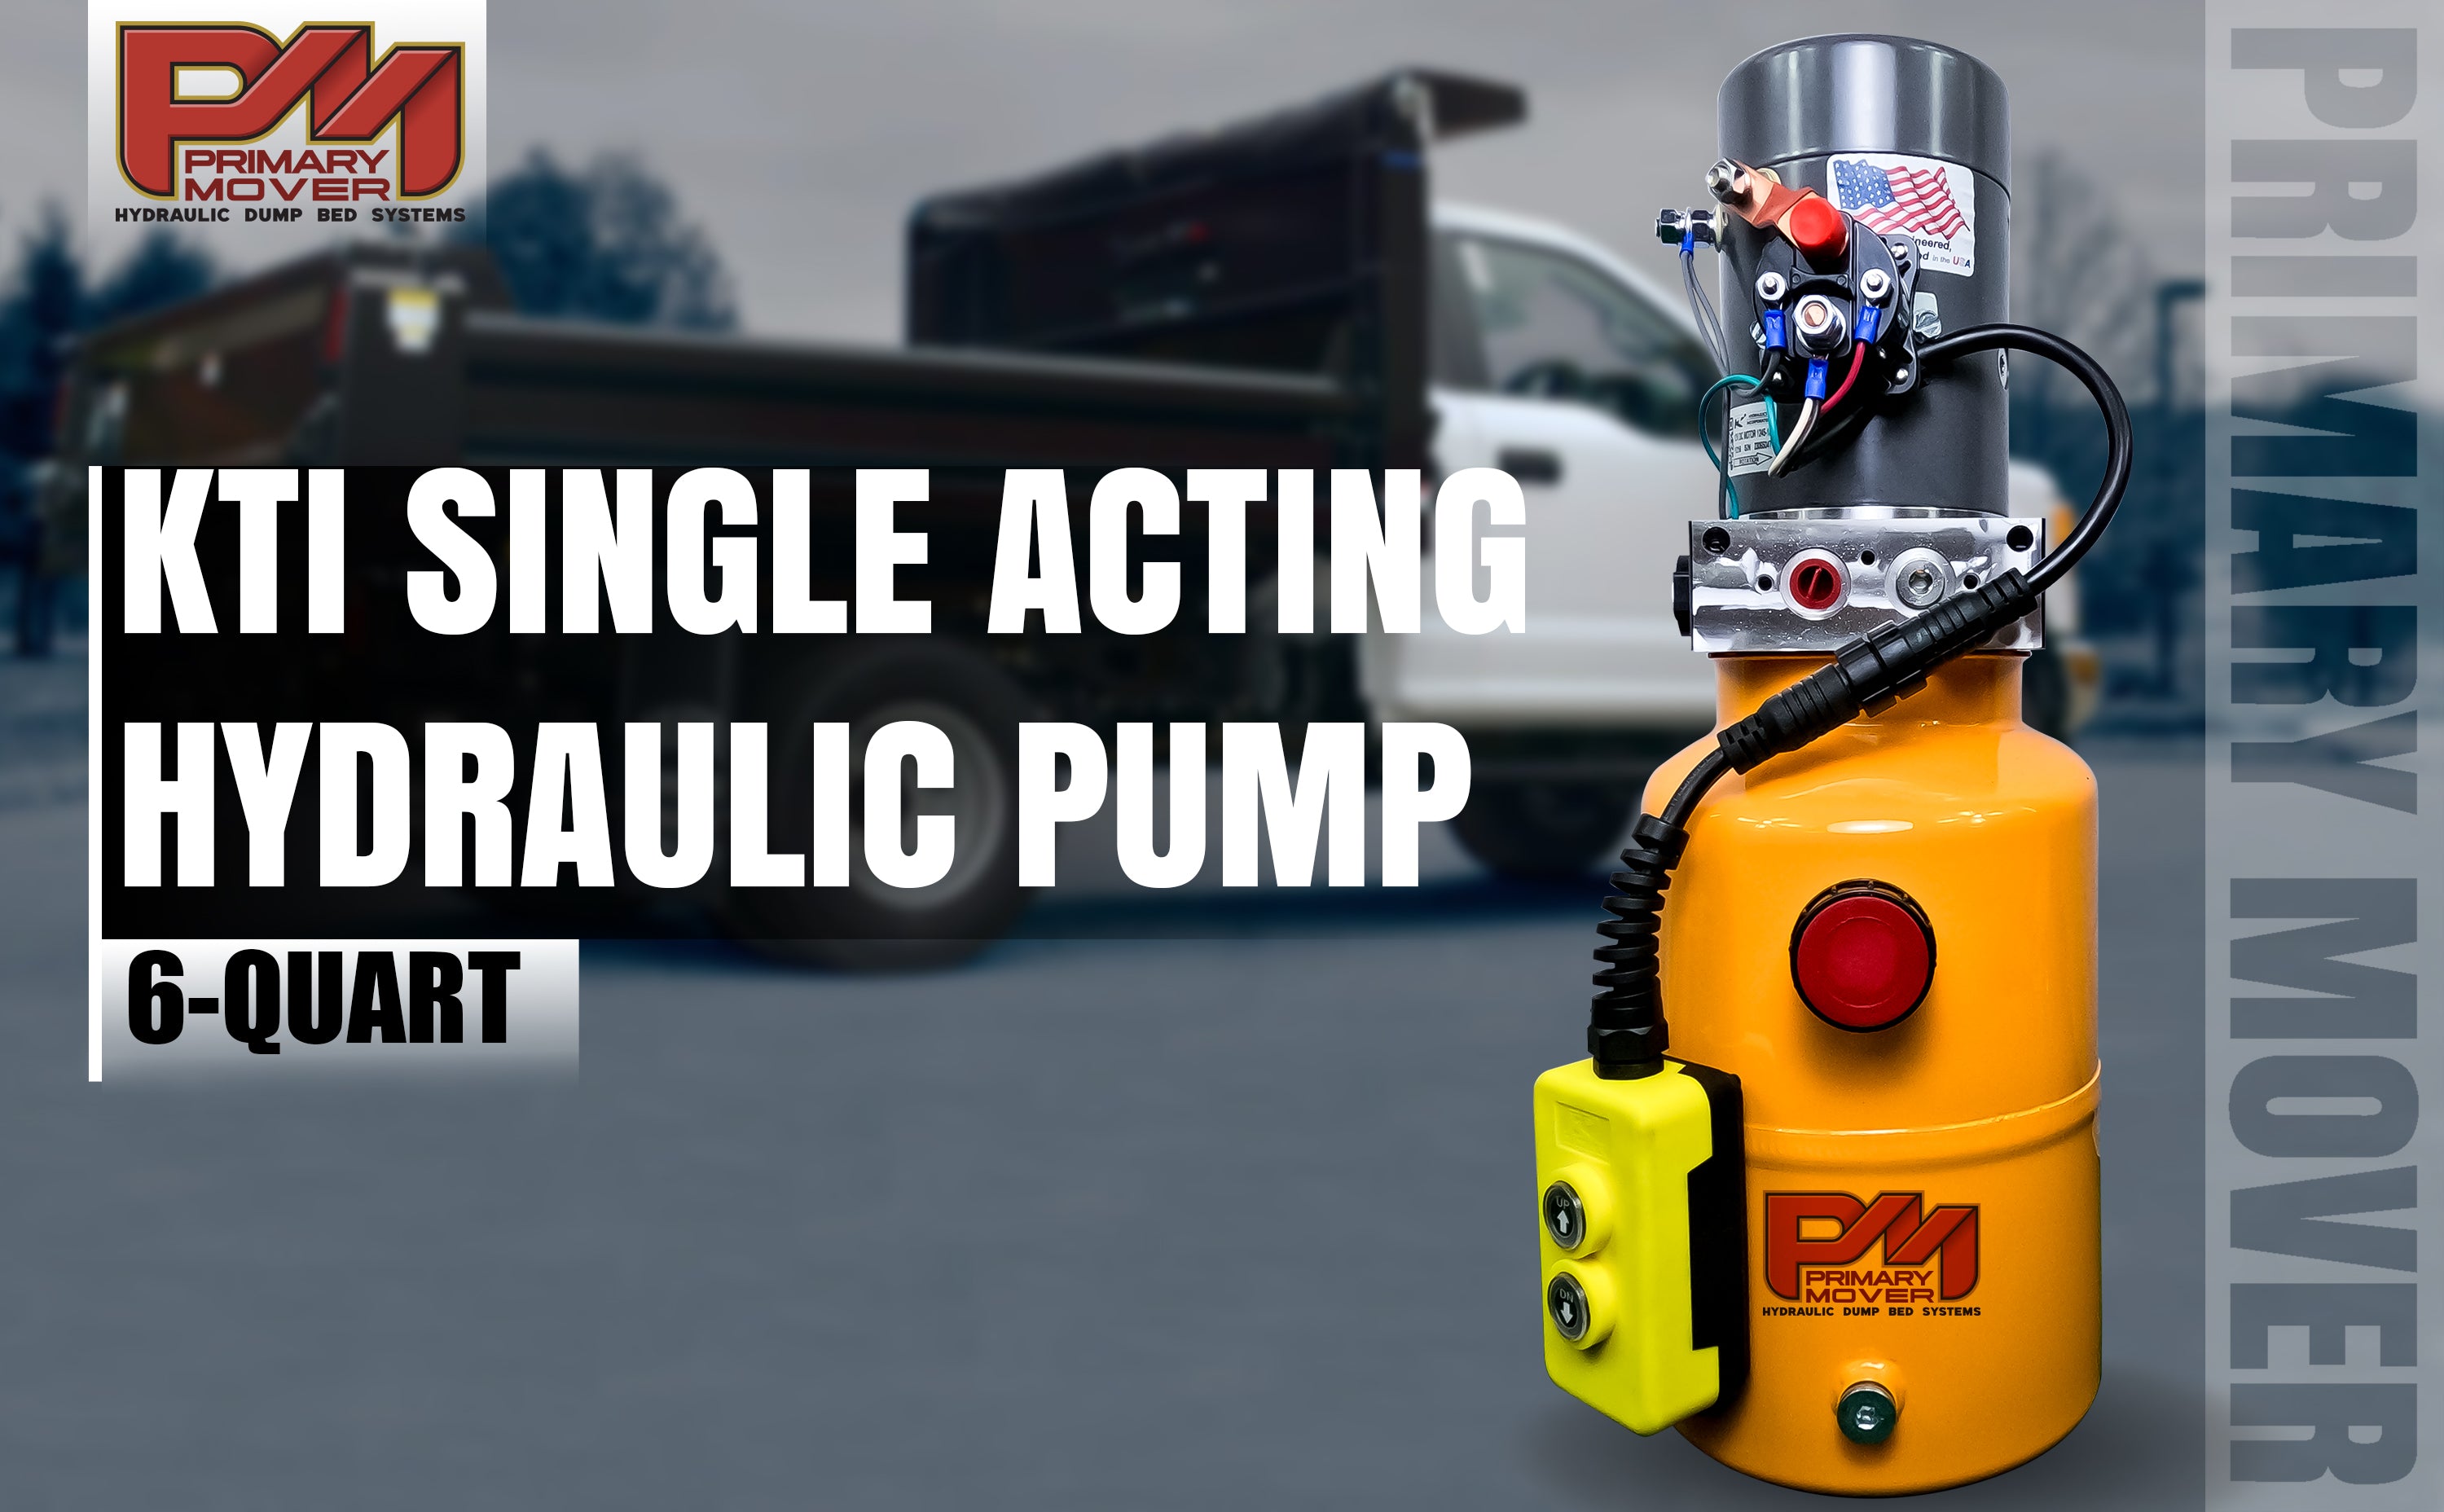 KTI 12V Single-Acting Hydraulic Pump with Steel Reservoir, designed for hydraulic dump bed systems. Features durable construction and compact design for efficient operation.